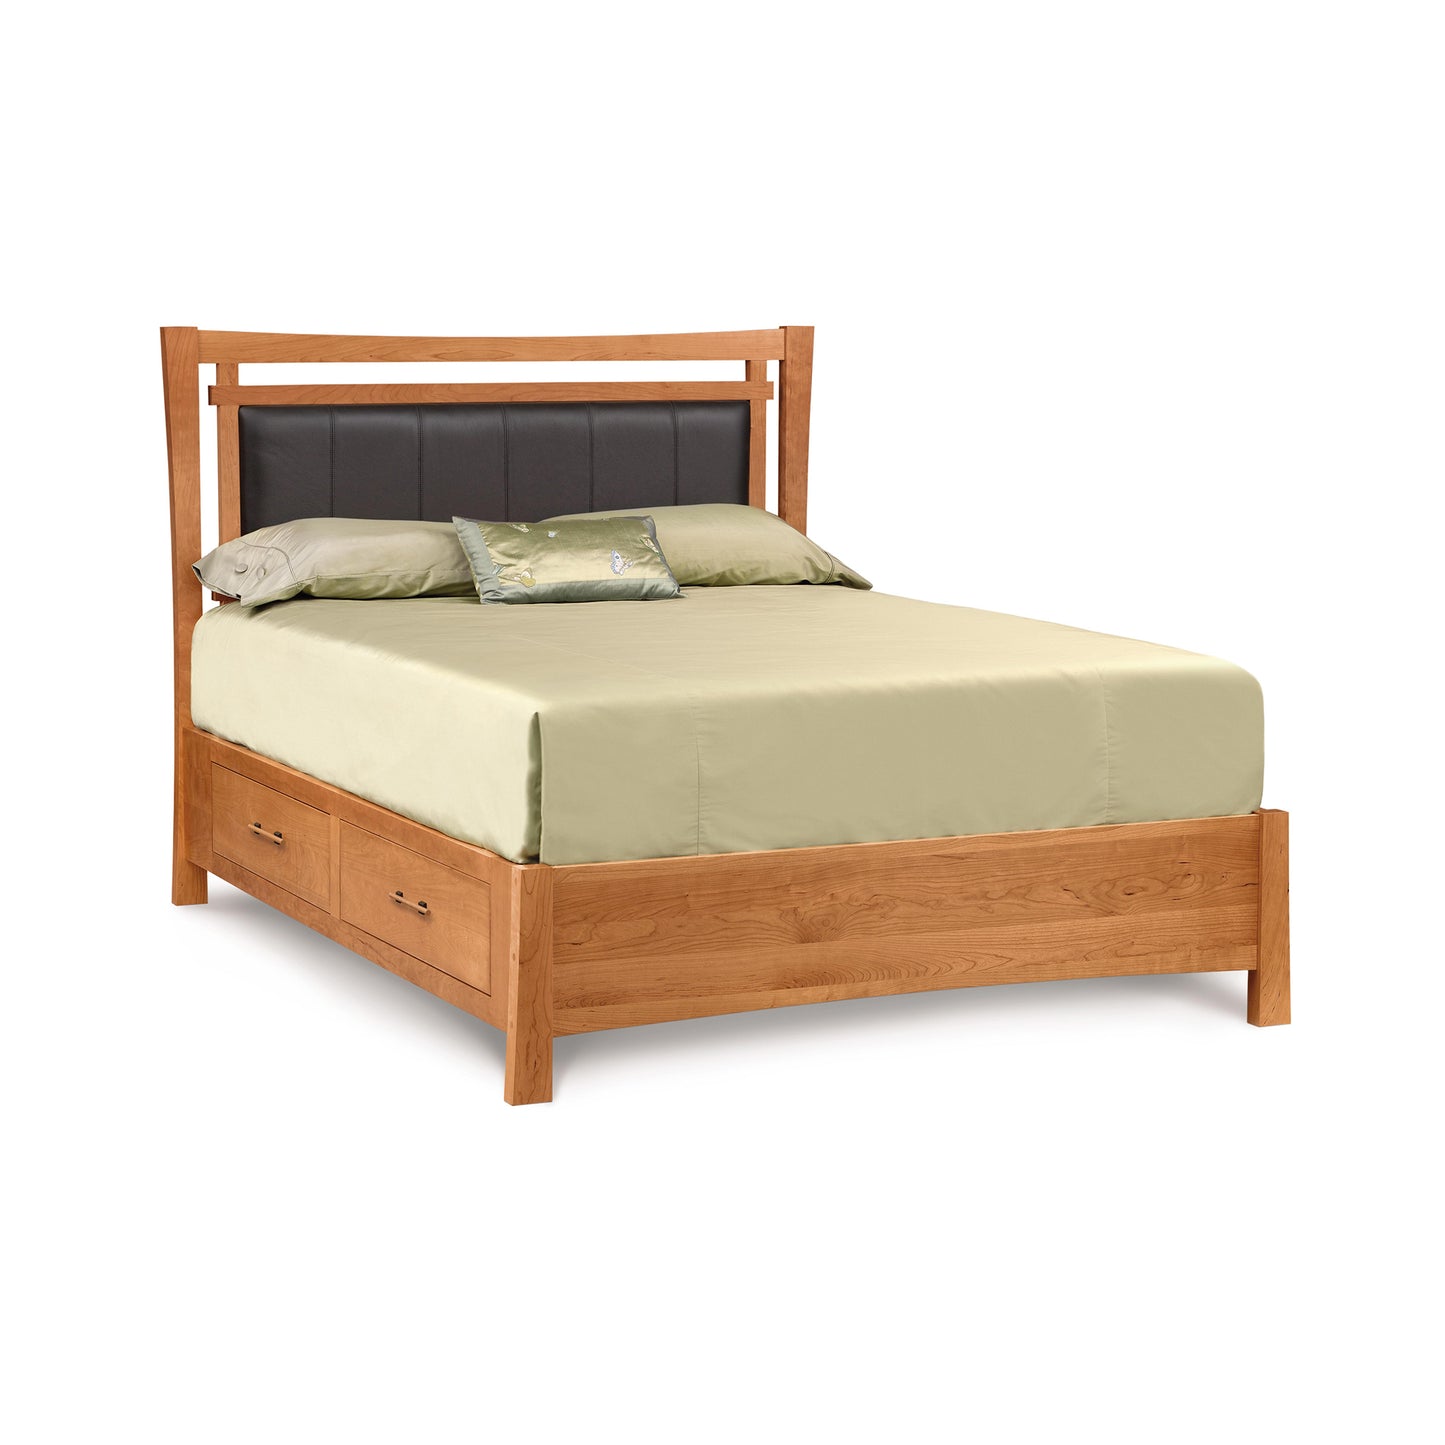 An eco-friendly Monterey Storage Bed with Upholstered Headboard by Copeland Furniture, outfitted with a light green bedsheet, two pillows, and a decorative cushion, set against a white background.